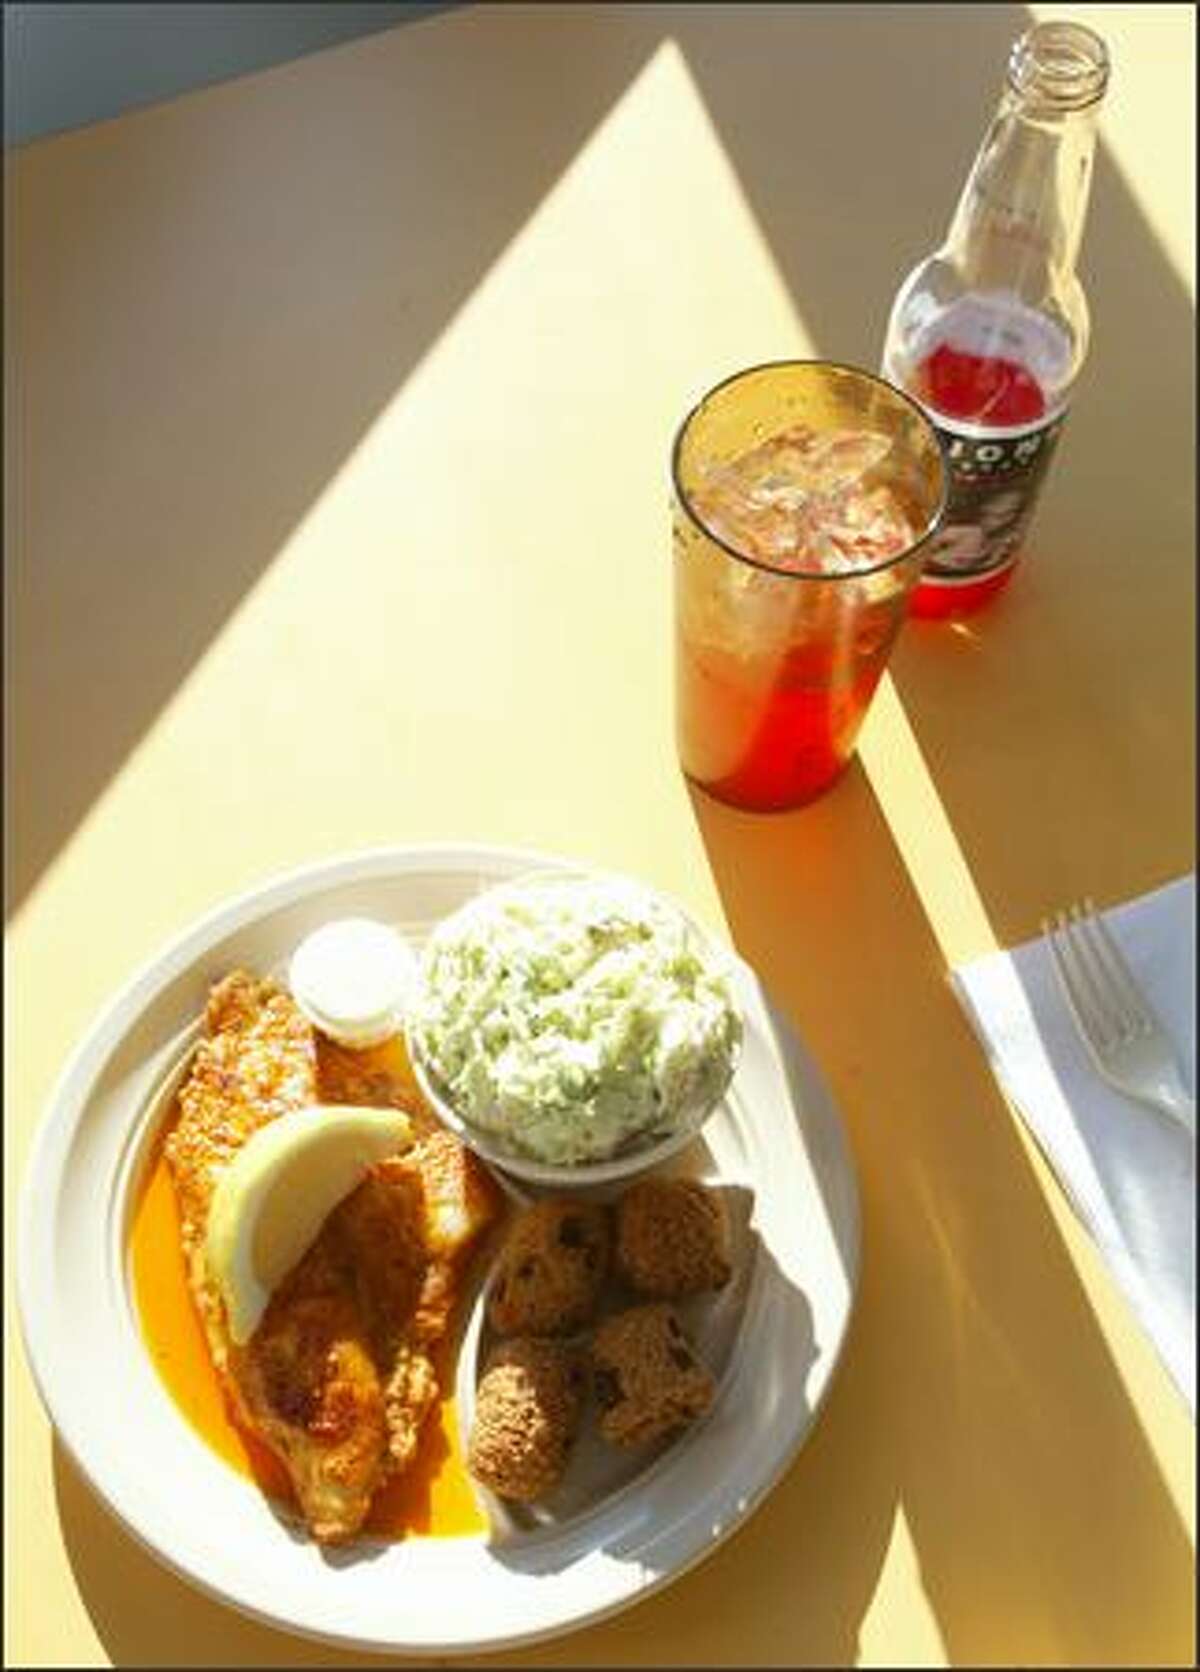 Every Tuesday the special is Cajun Style Catfish at Catfish Corner in the Central District.